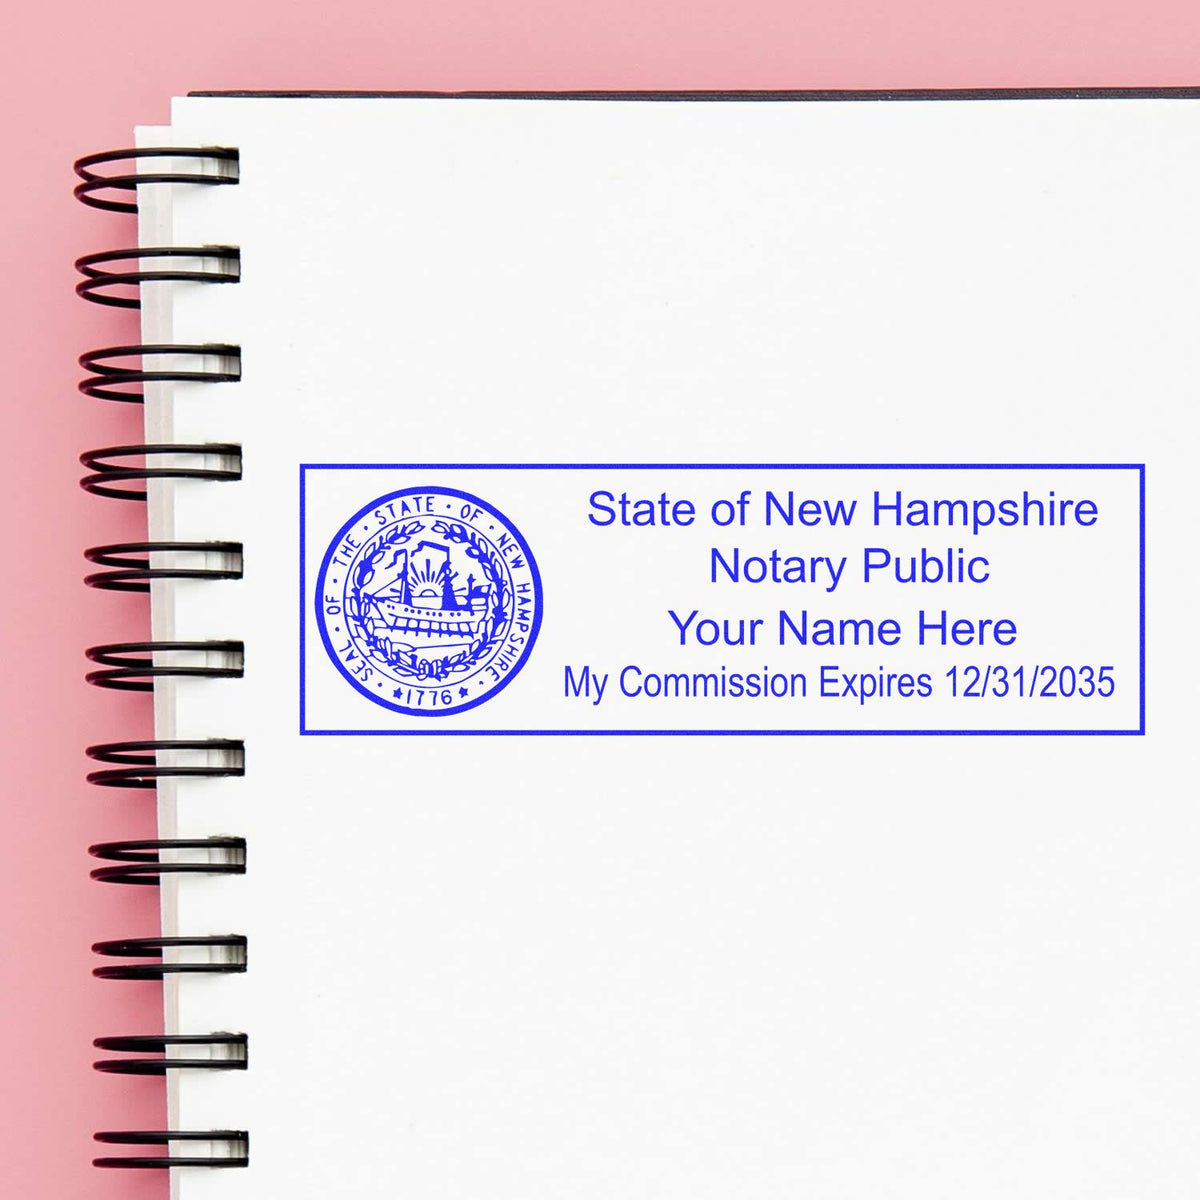 This paper is stamped with a sample imprint of the Slim Pre-Inked State Seal Notary Stamp for New Hampshire, signifying its quality and reliability.